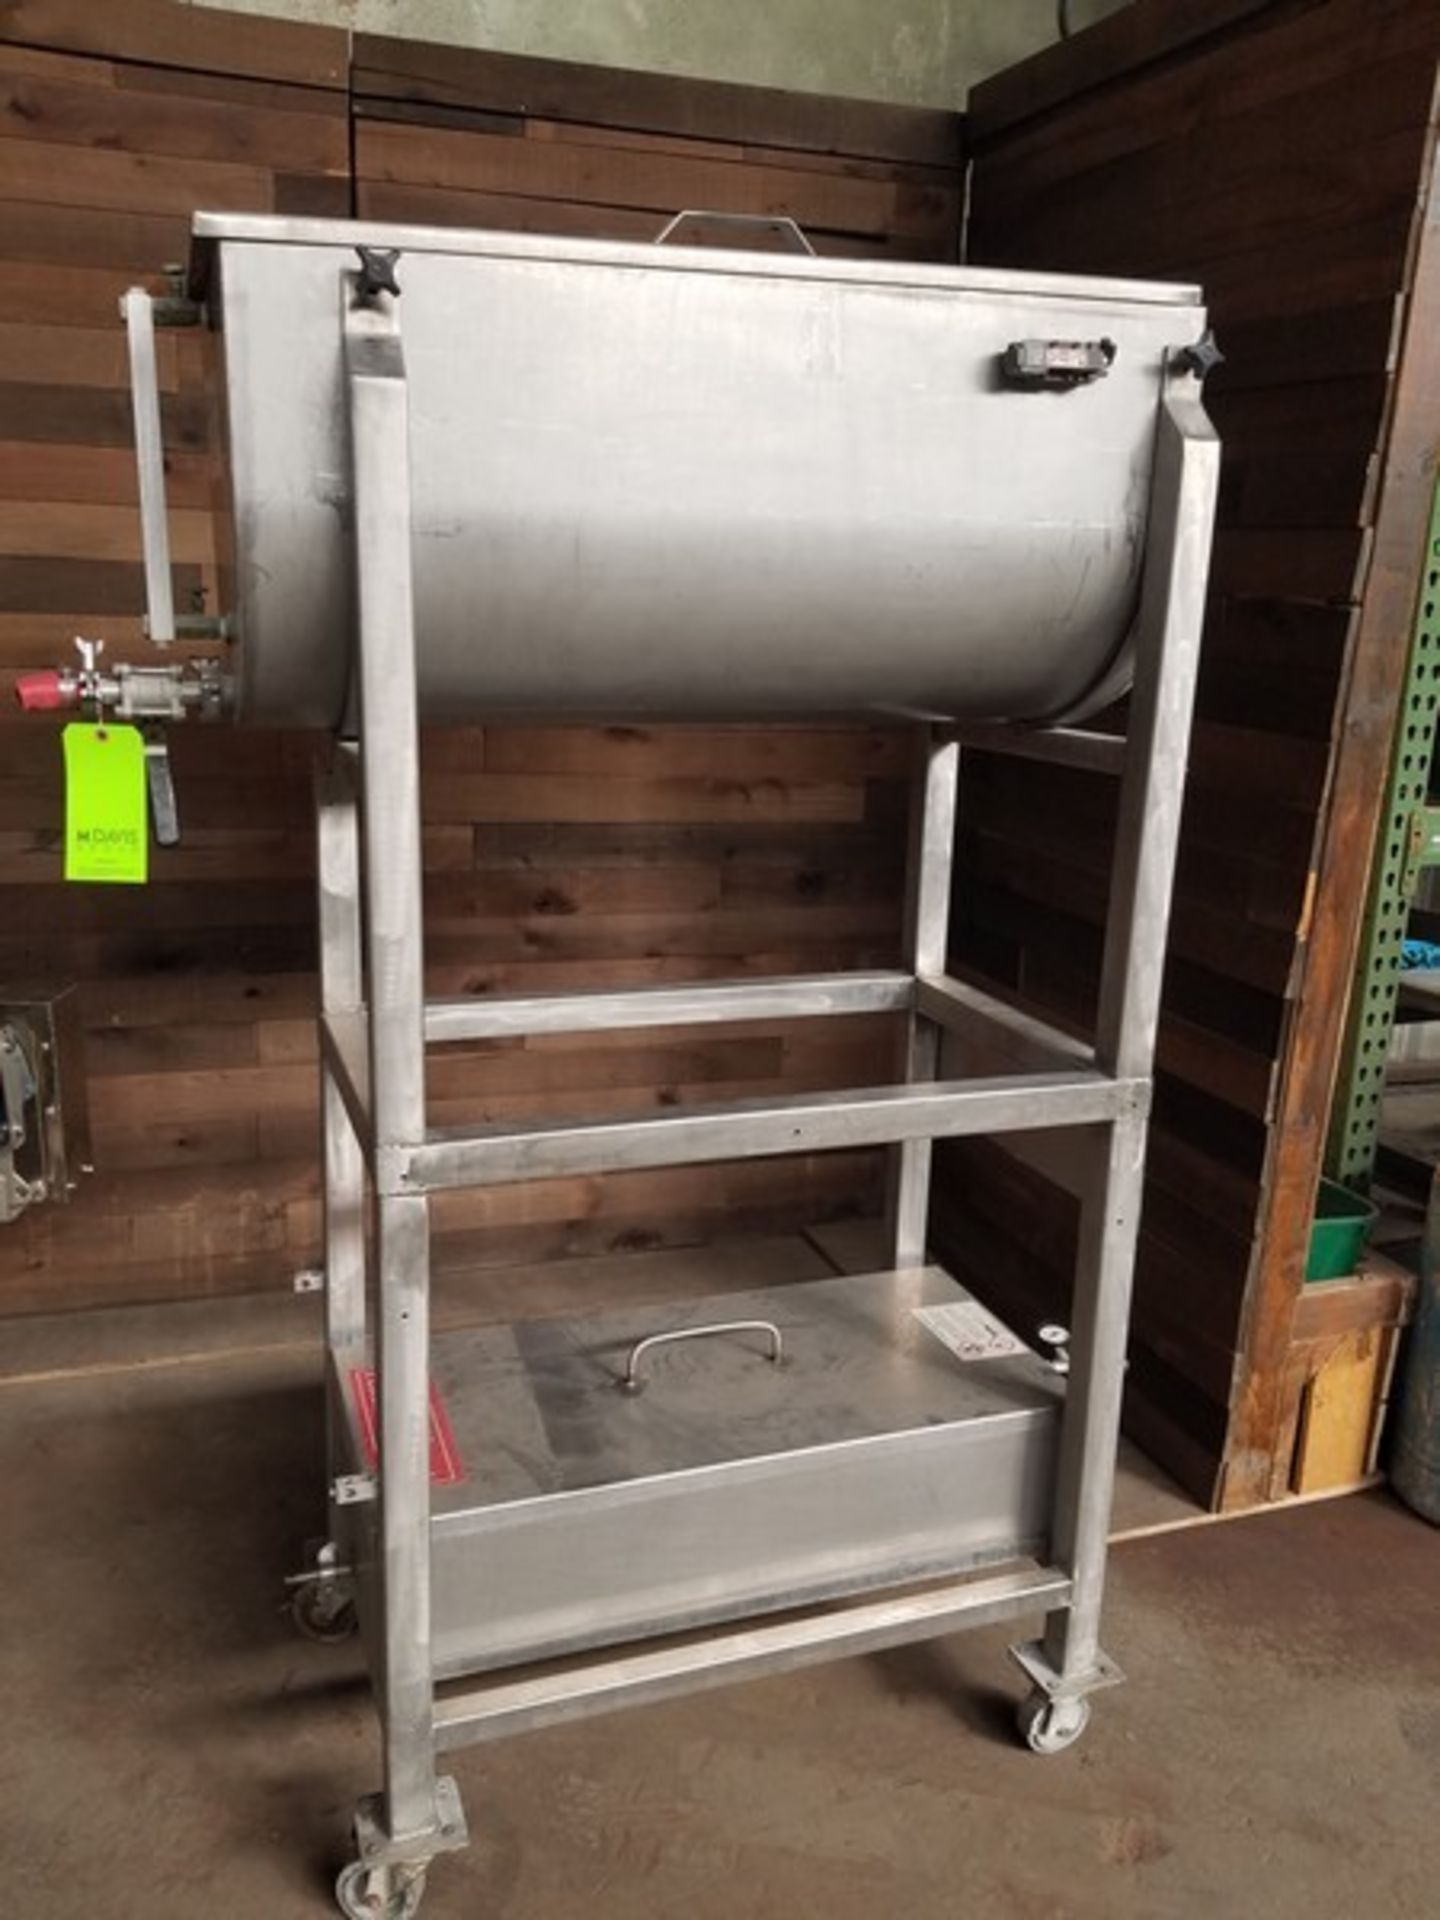 Aprox. 18" W x 40" L x 18" H S/S Holding Tank on Casters and Aprox. 13" W x 36" L x 8" H Lower